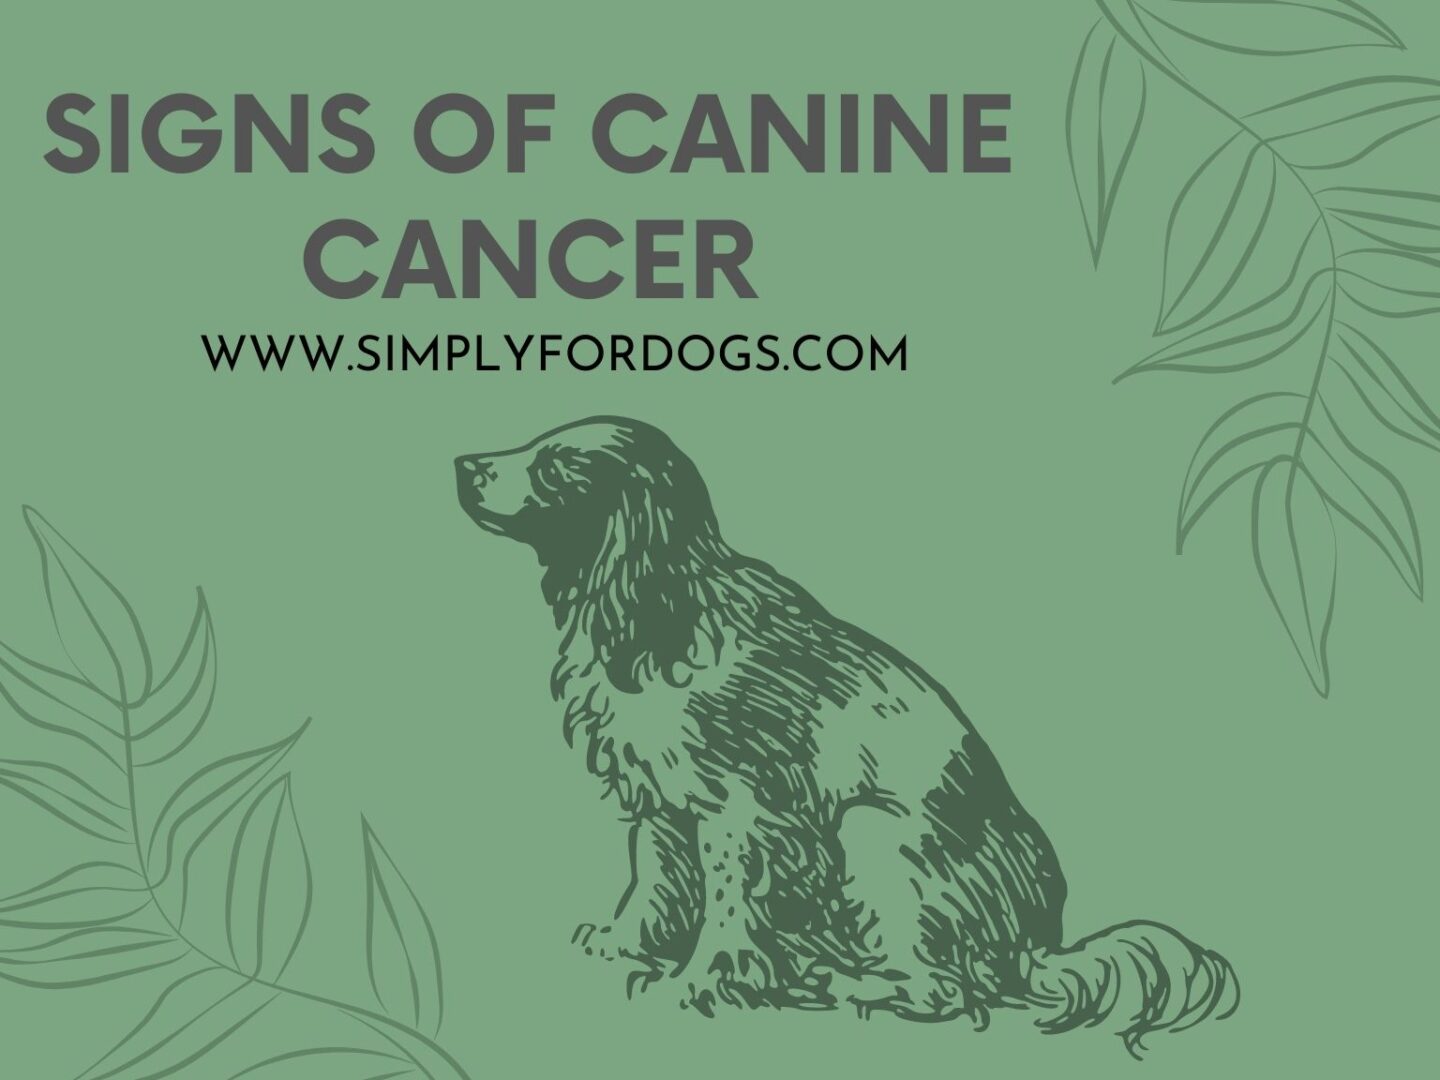 Signs of Canine Cancer